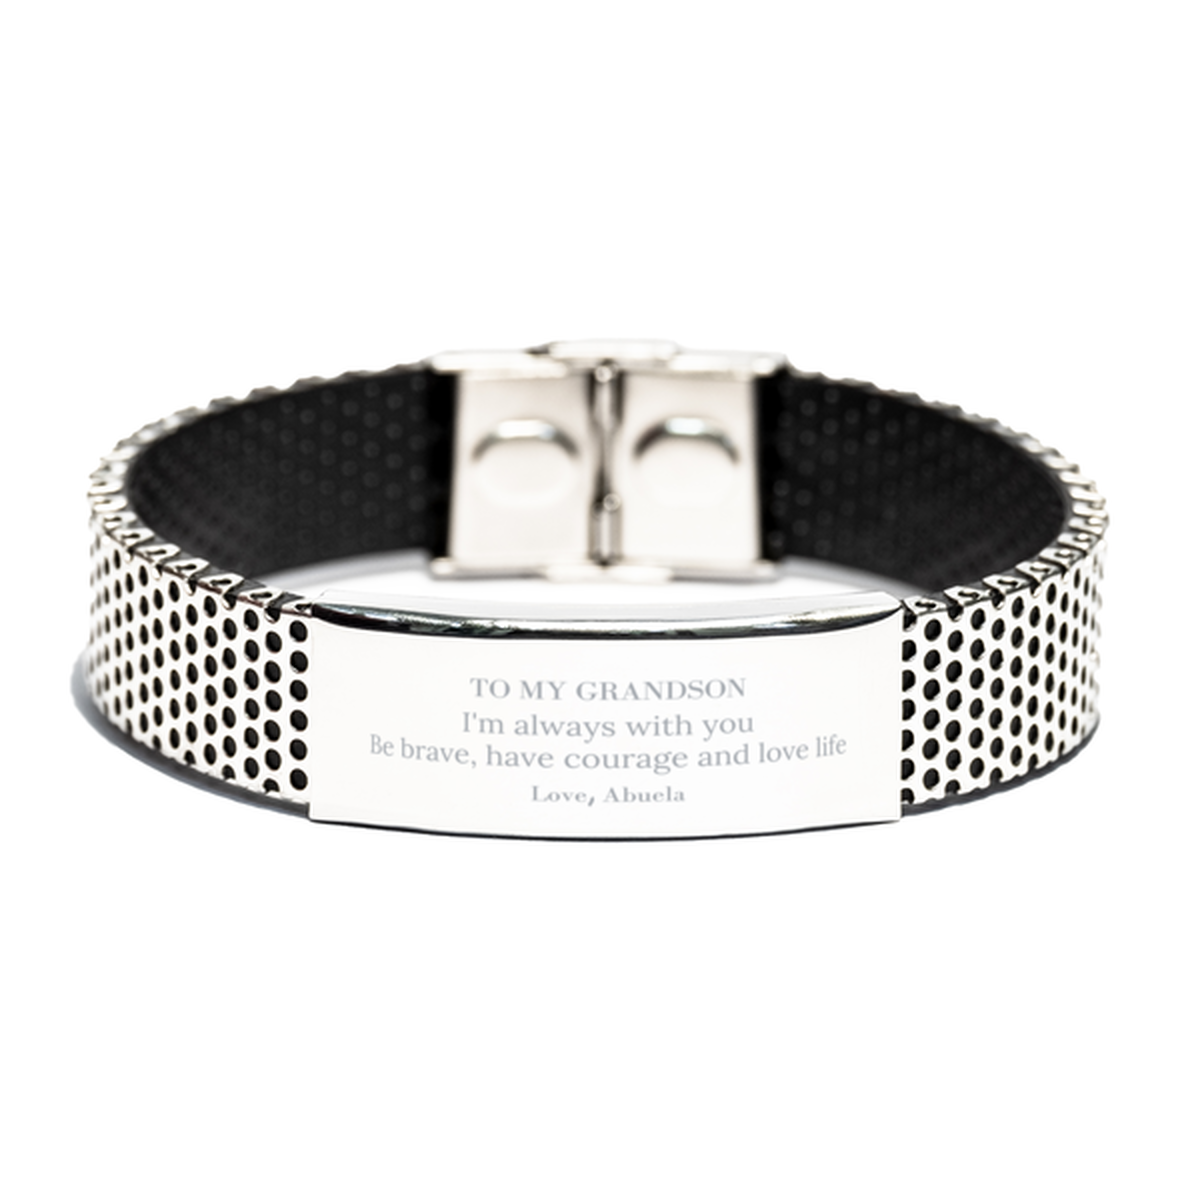 To My Grandson Gifts from Abuela, Unique Stainless Steel Bracelet Inspirational Christmas Birthday Graduation Gifts for Grandson I'm always with you. Be brave, have courage and love life. Love, Abuela